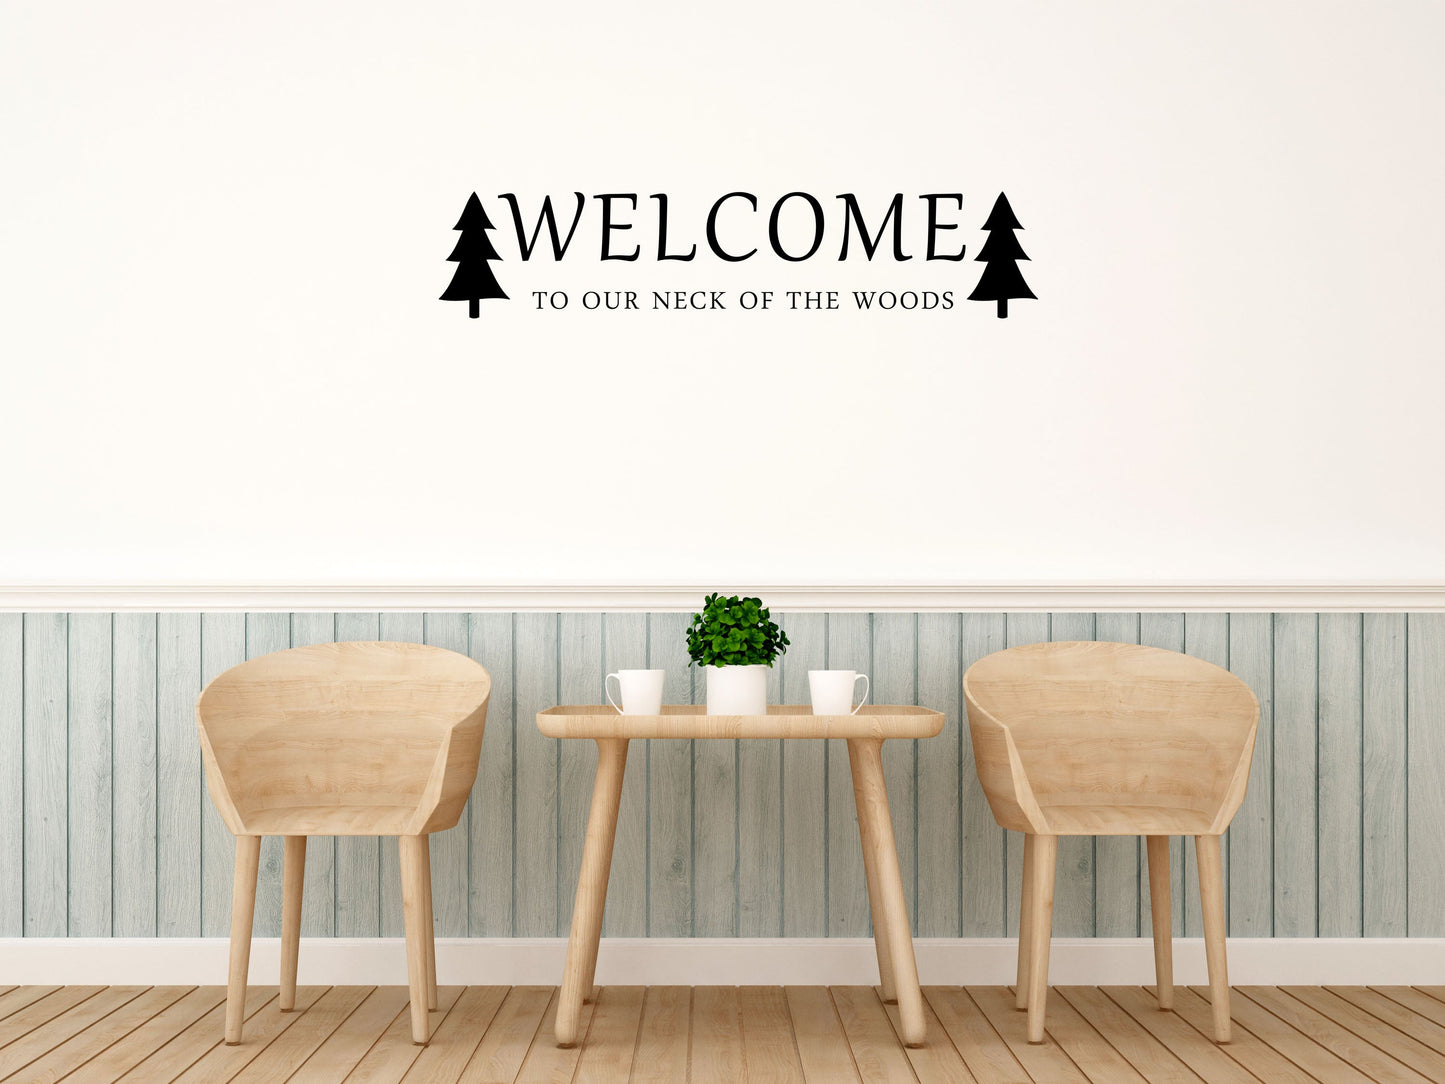 Welcome To Our Neck Of The Woods Vinyl Wall Decal Inspirational Wall Signs 